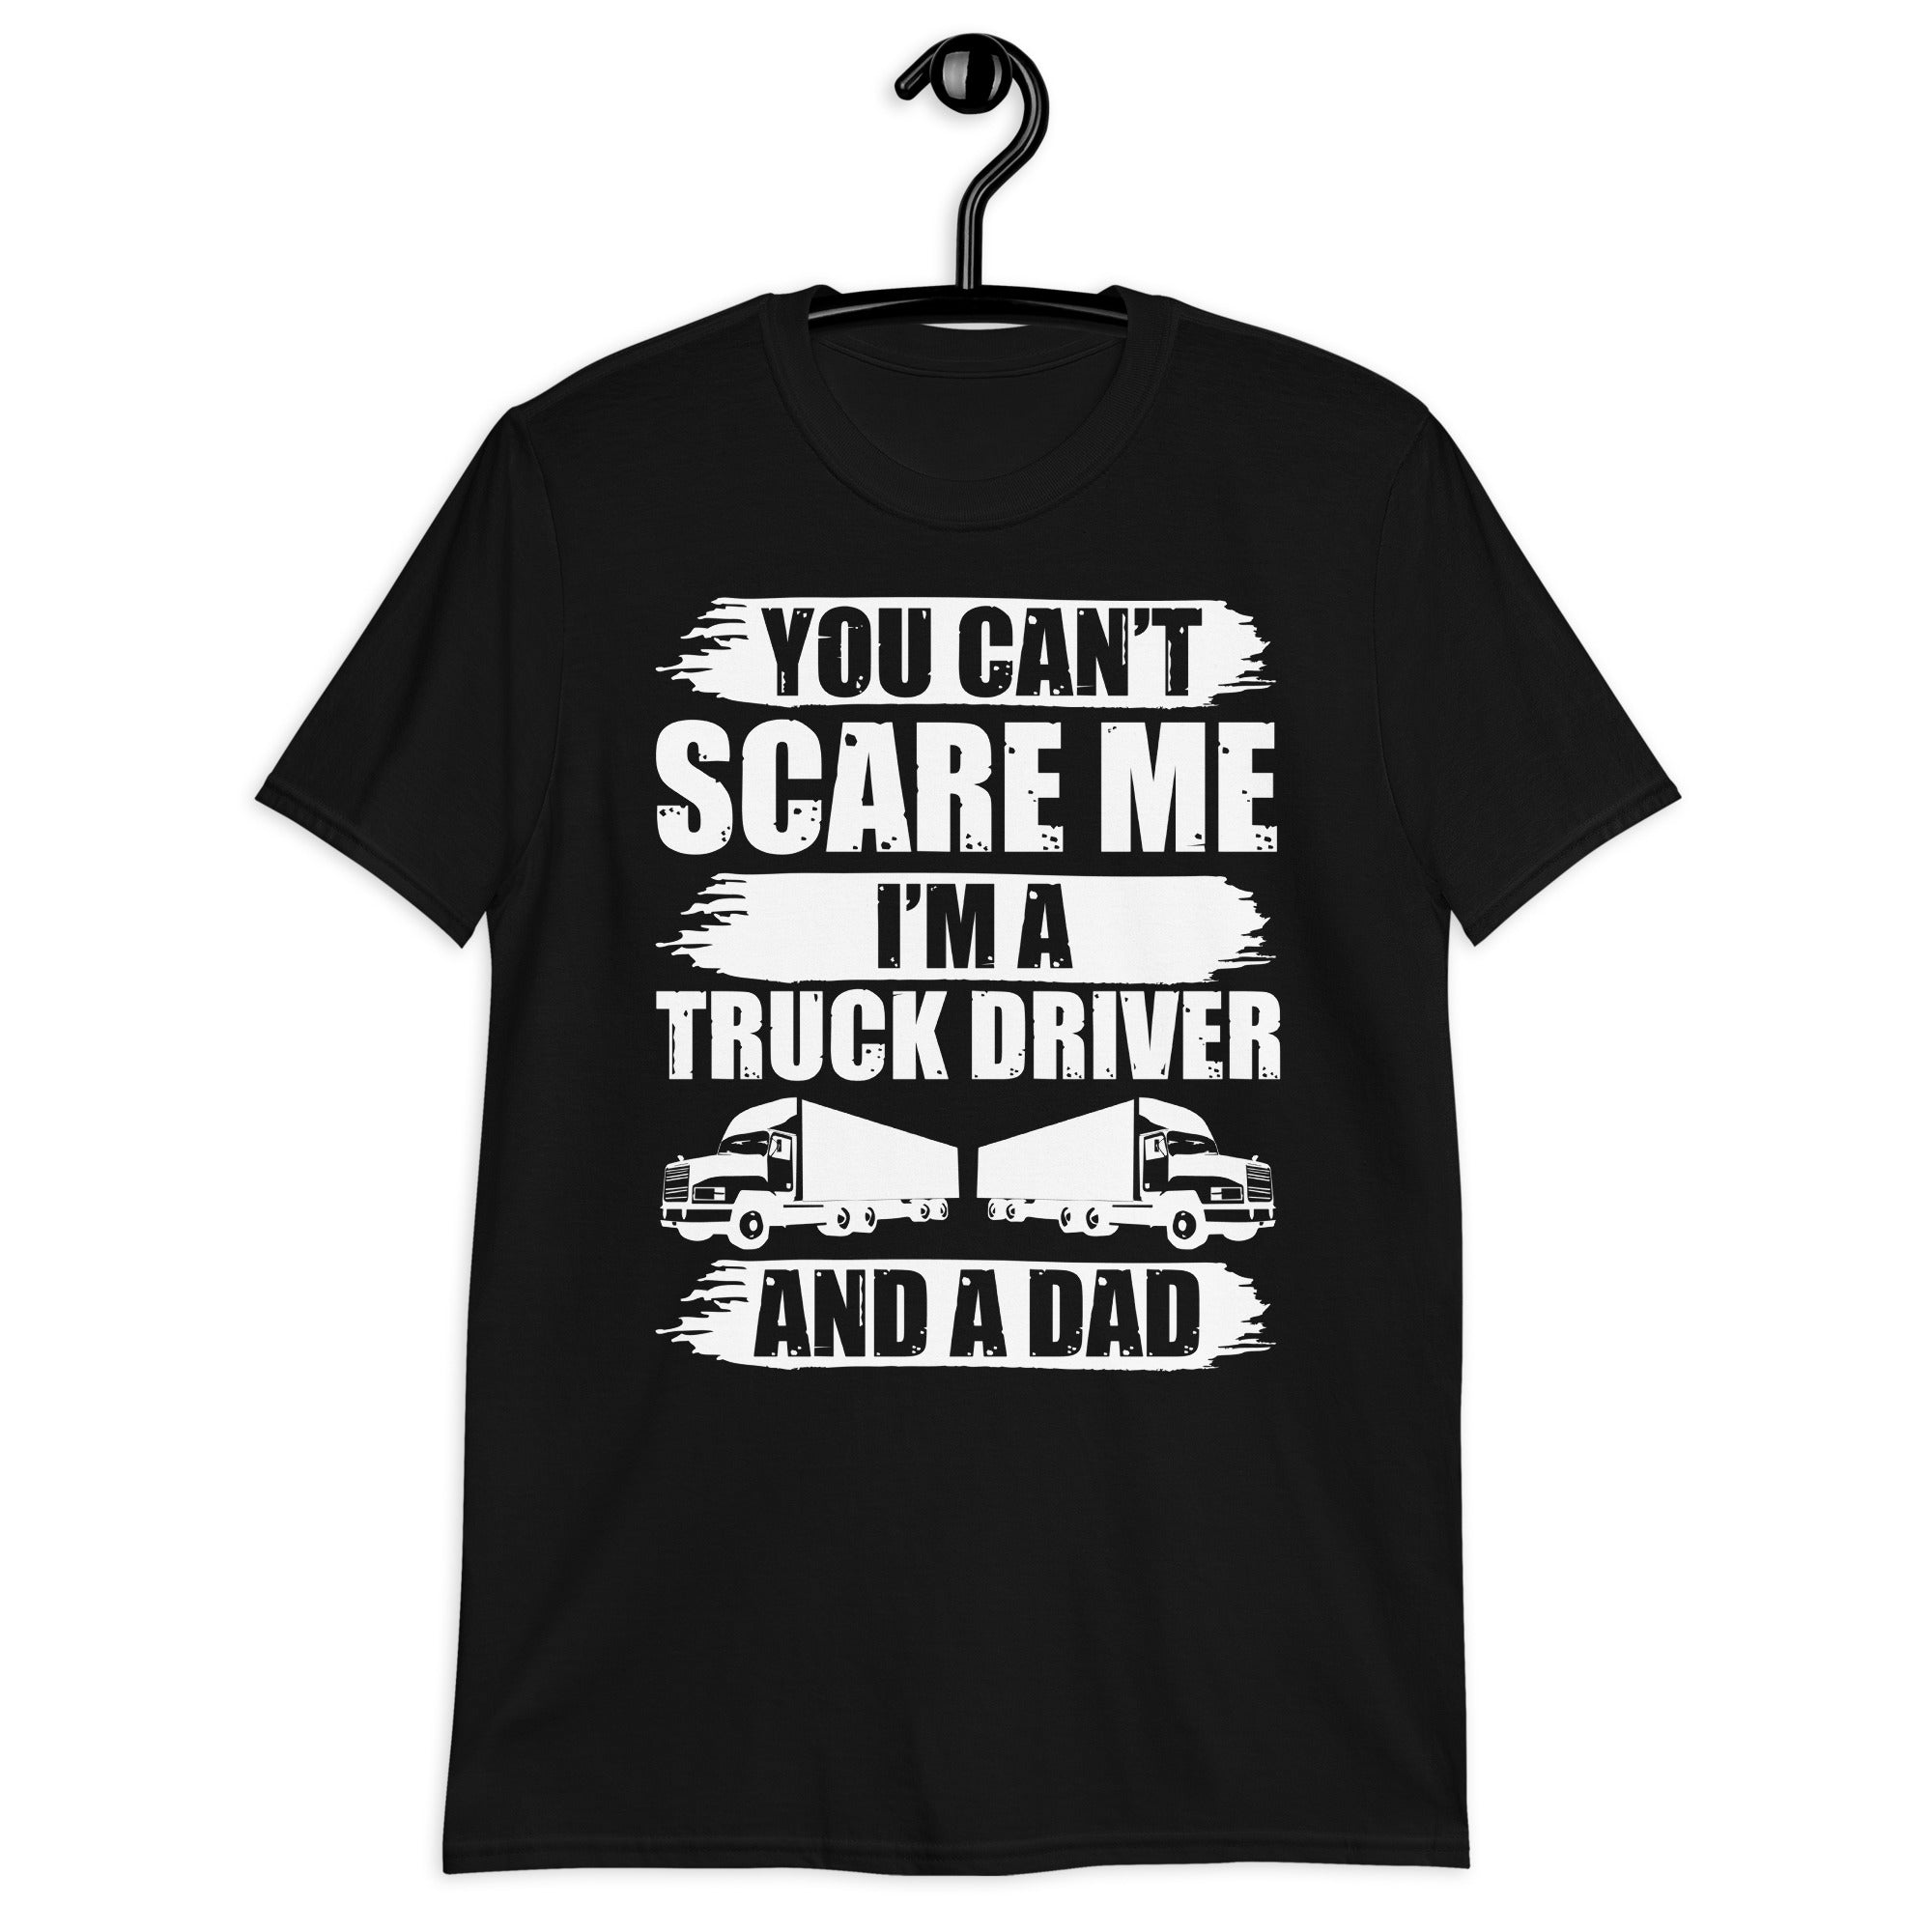 Truck Driver and Dad Funny Shirt, Funny Trucker Shirt, Truck Driver Tee, Gift For Dad, Trucker Dad Shirt, Truck Driver Gifts